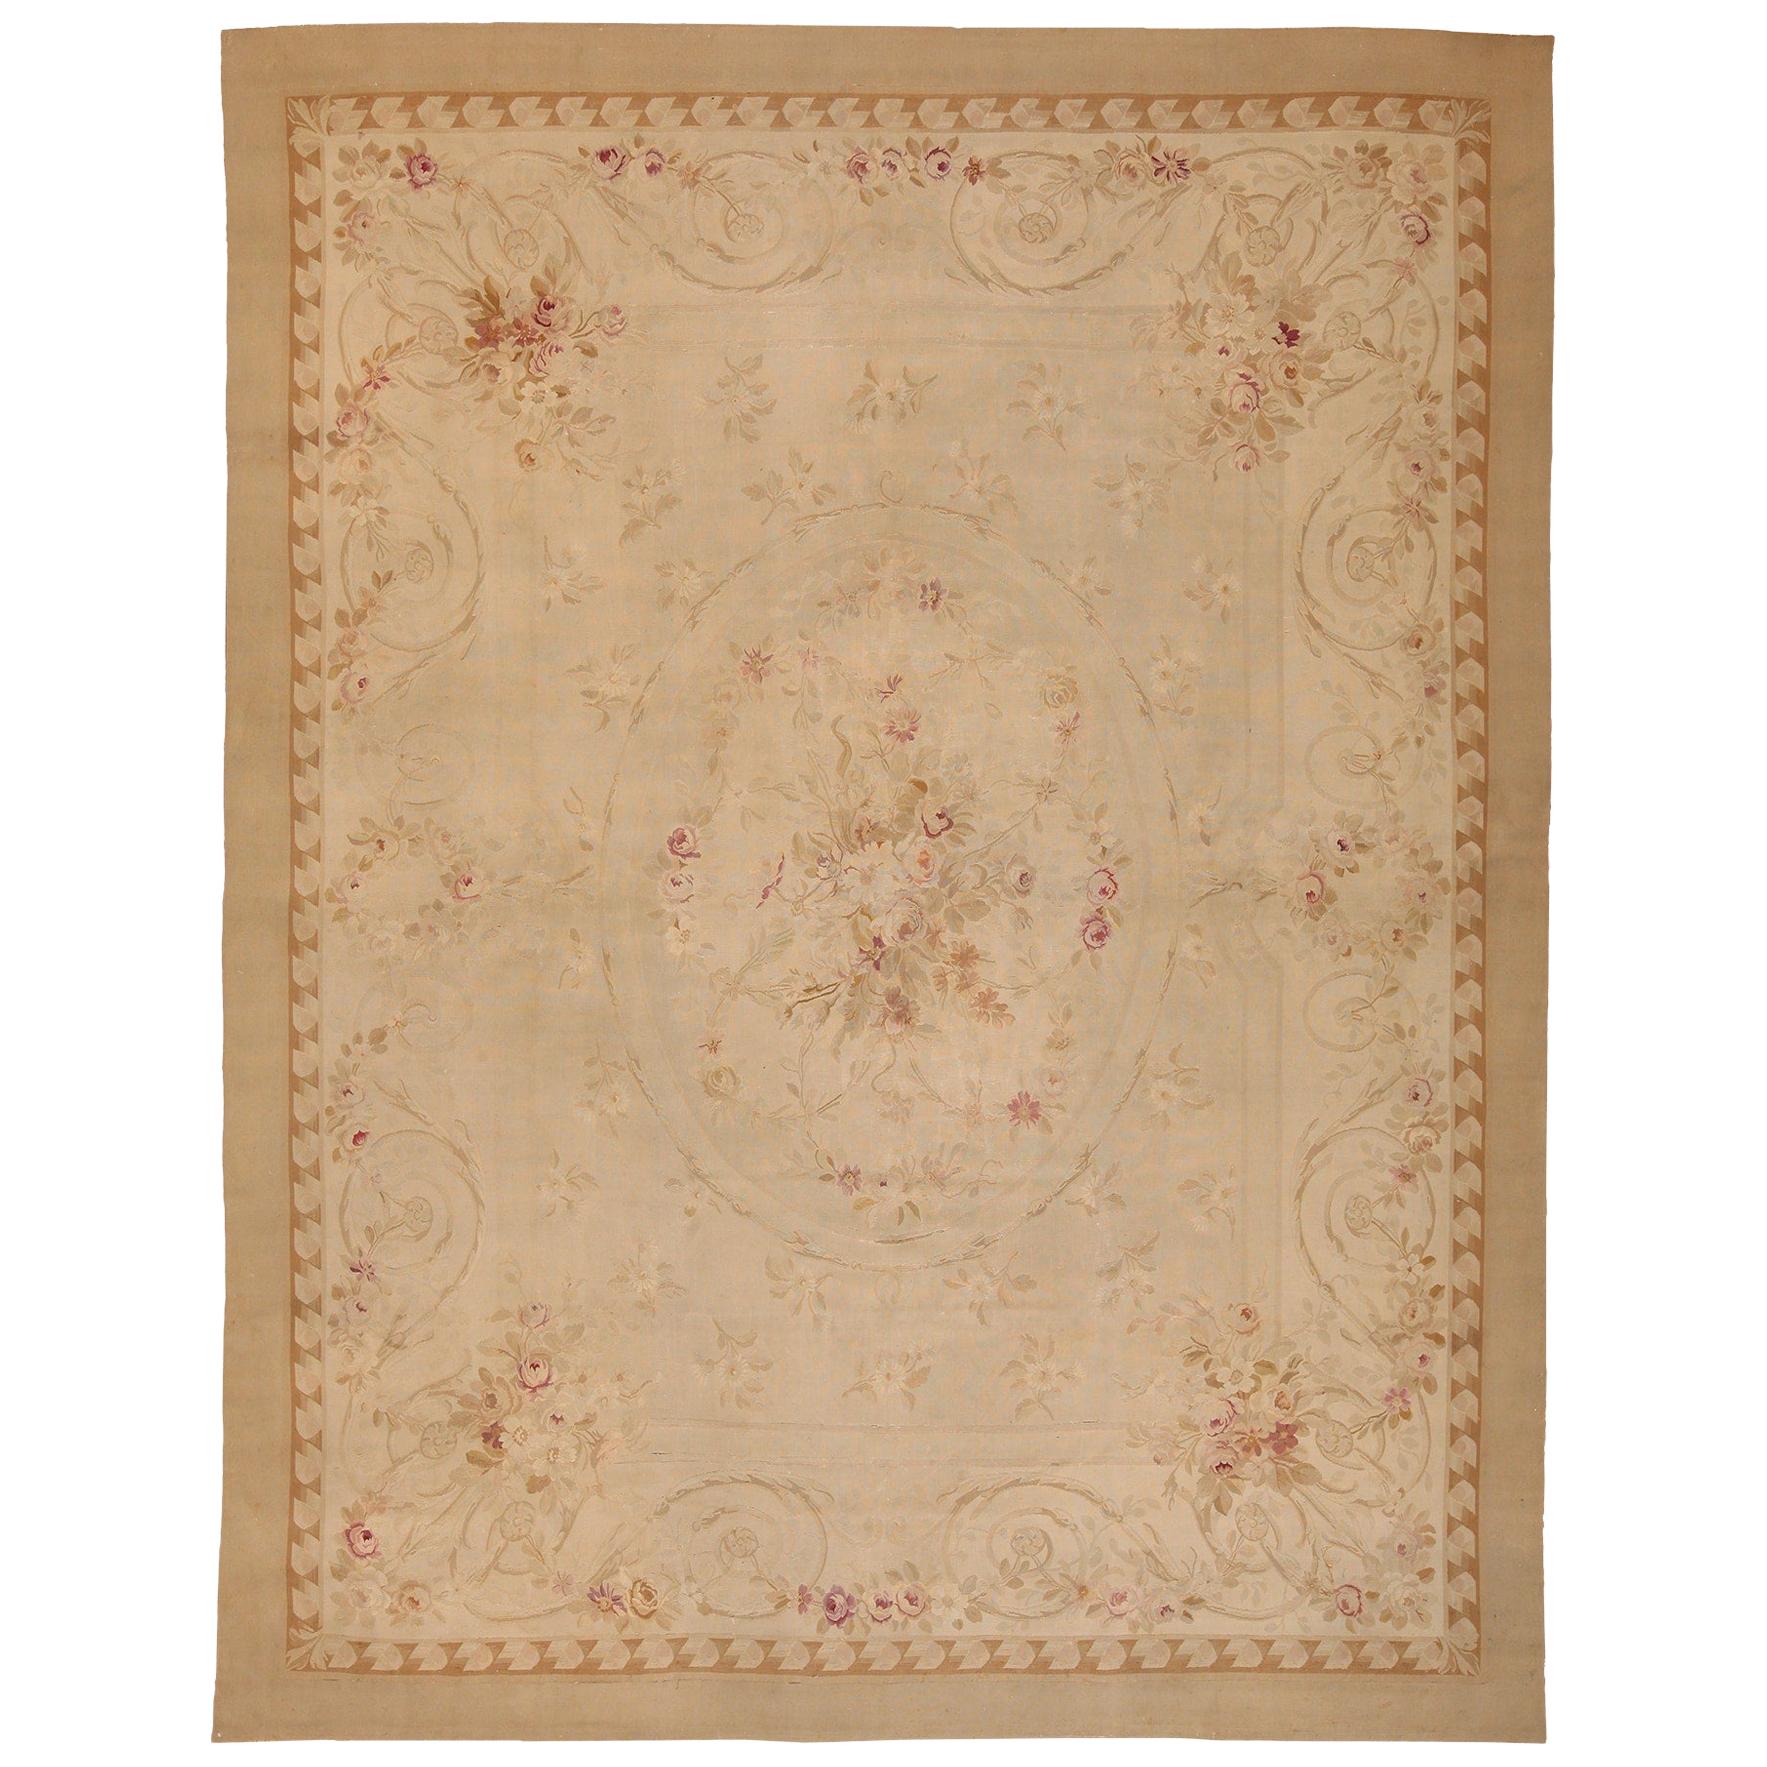 Antique Ivory French Aubusson Rug. Size: 10 ft x 13 ft 6 in 